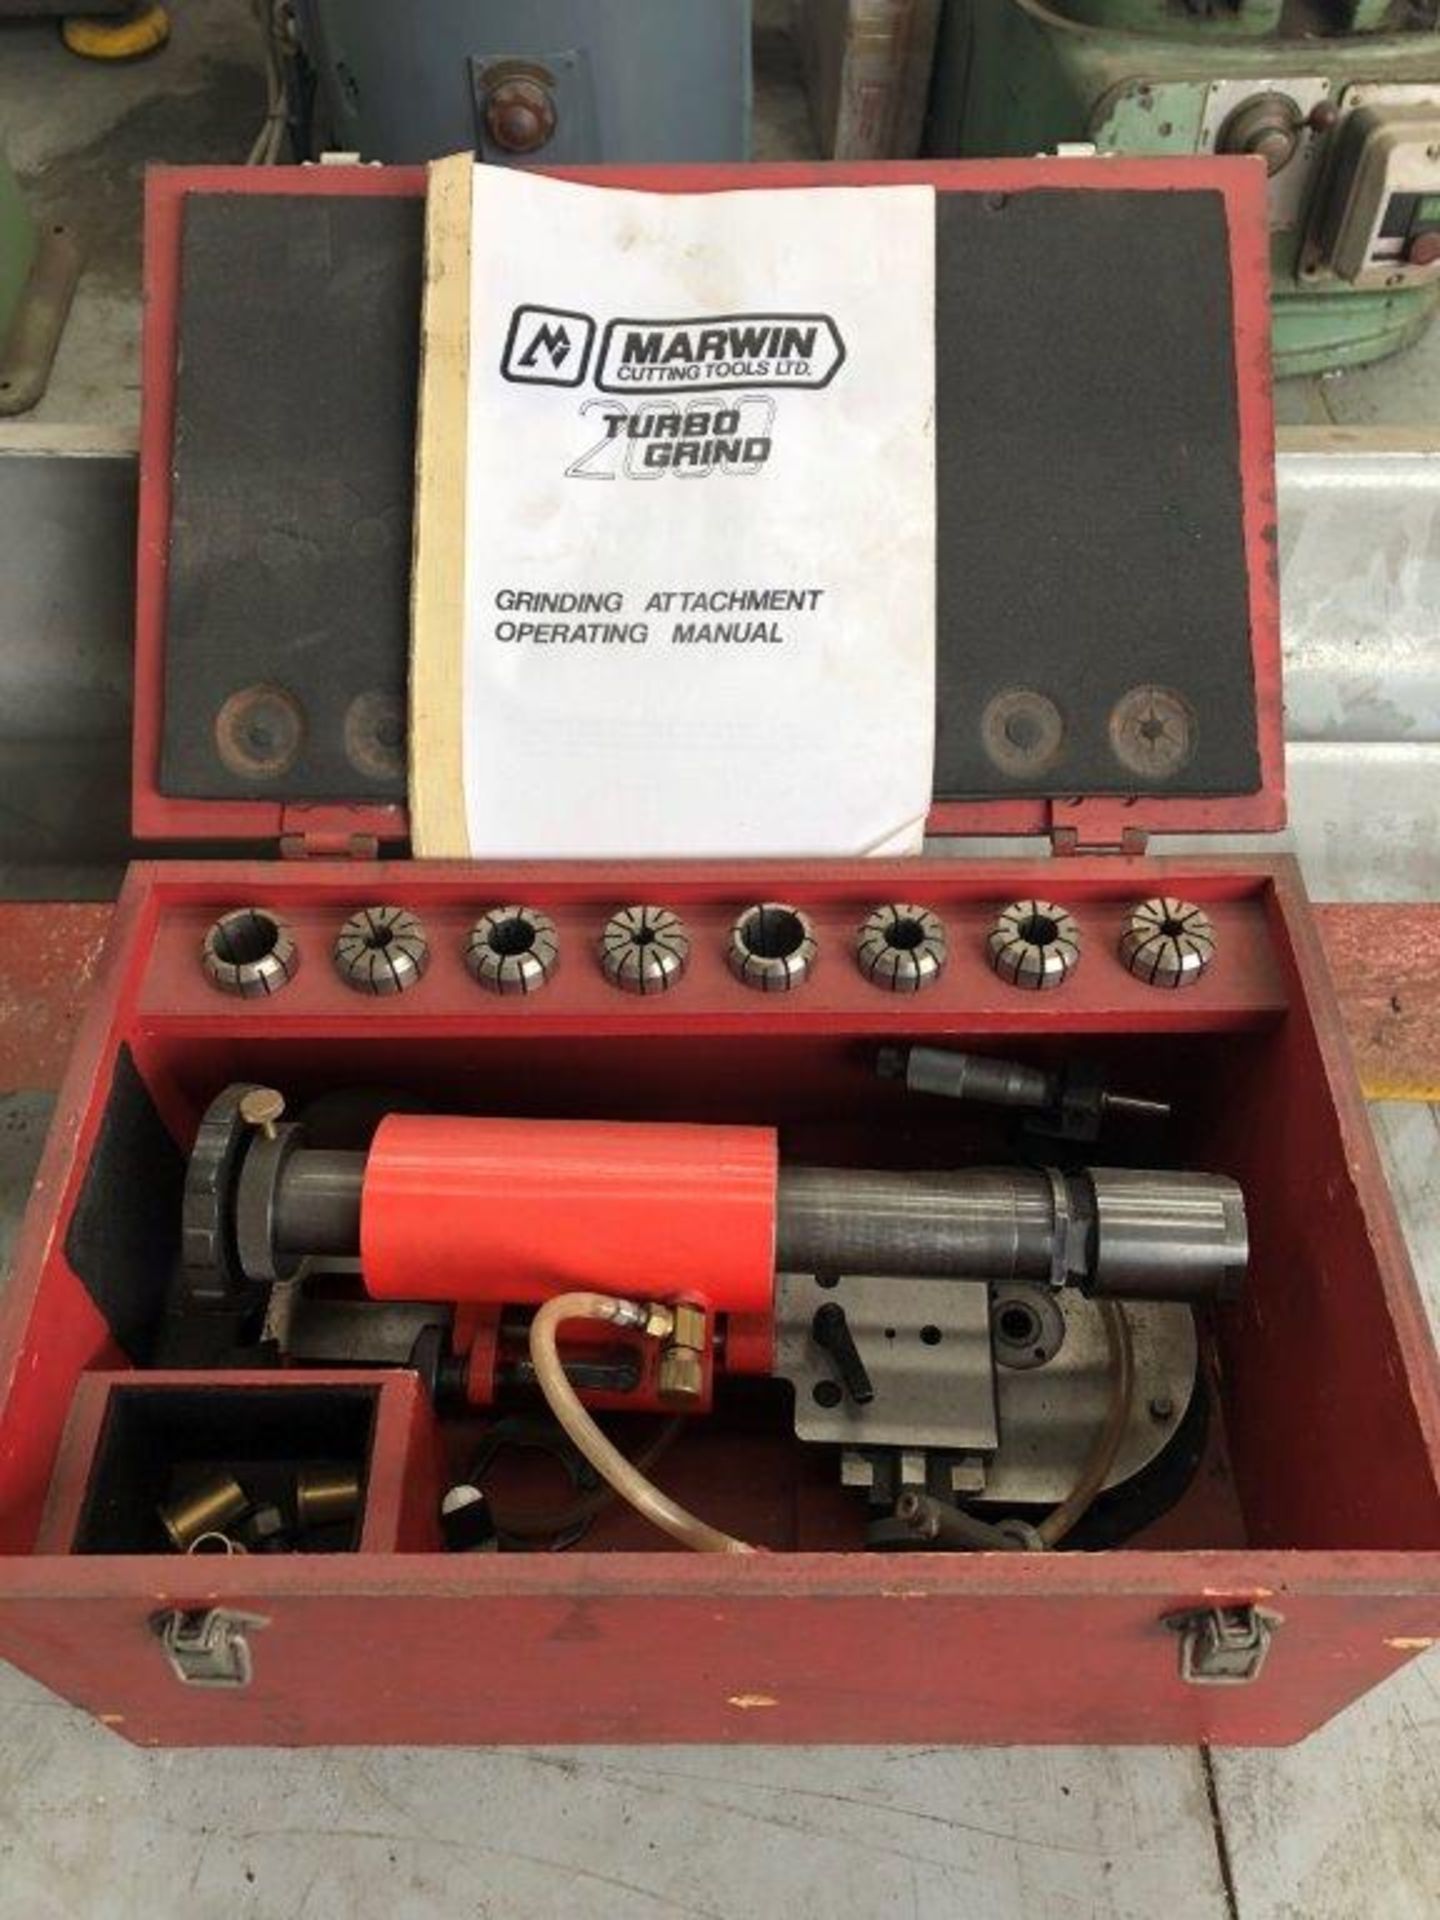 Marwin Turbo Grind 2000 Grinding Attachment